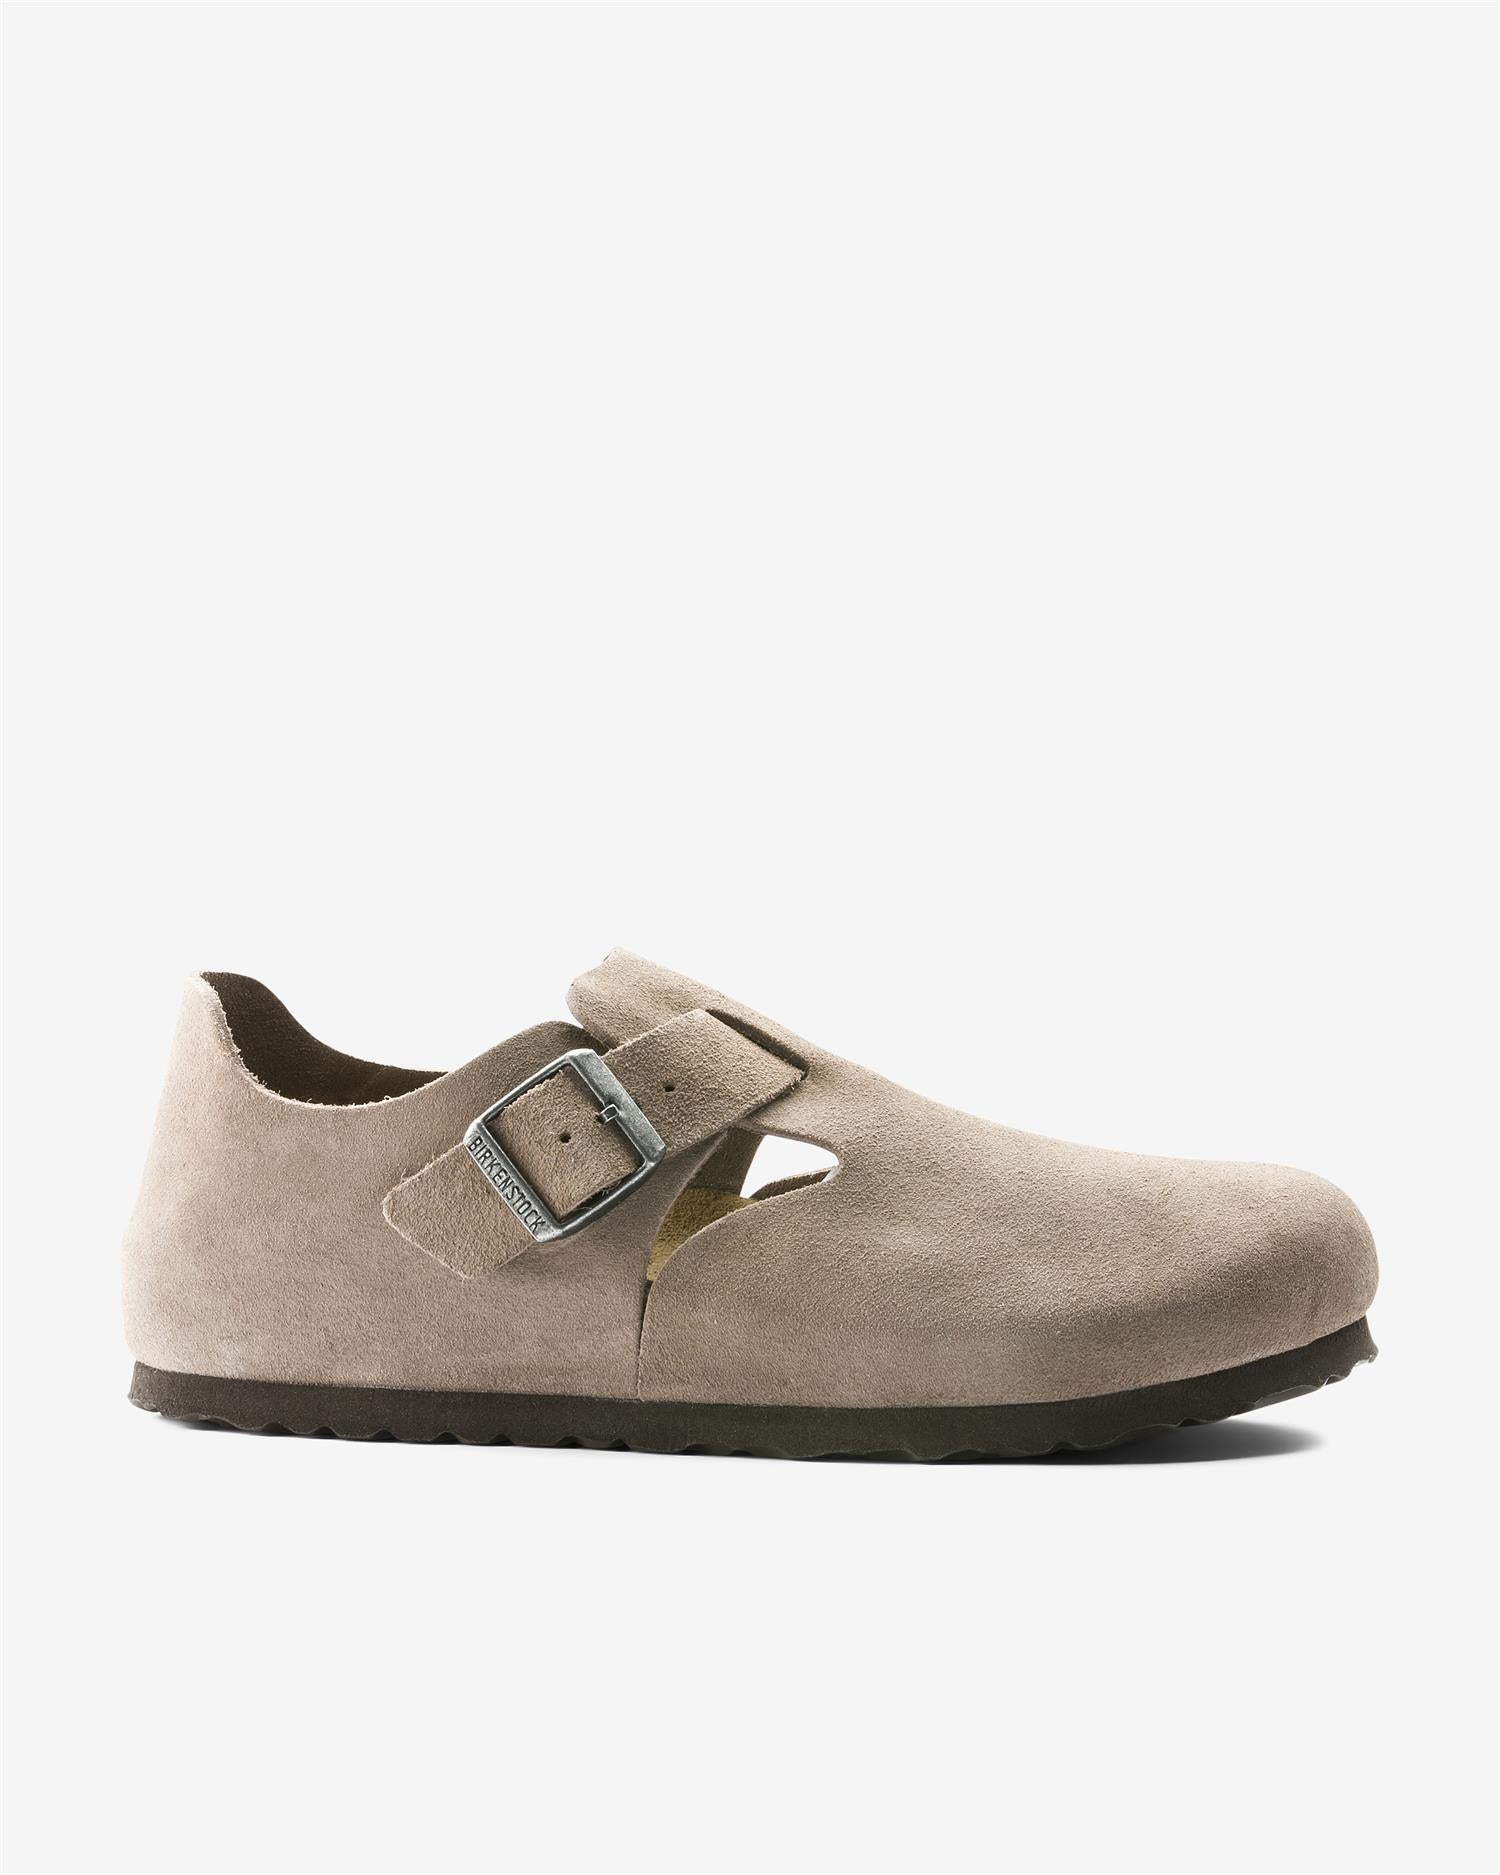 LONDON BS - TAUPE